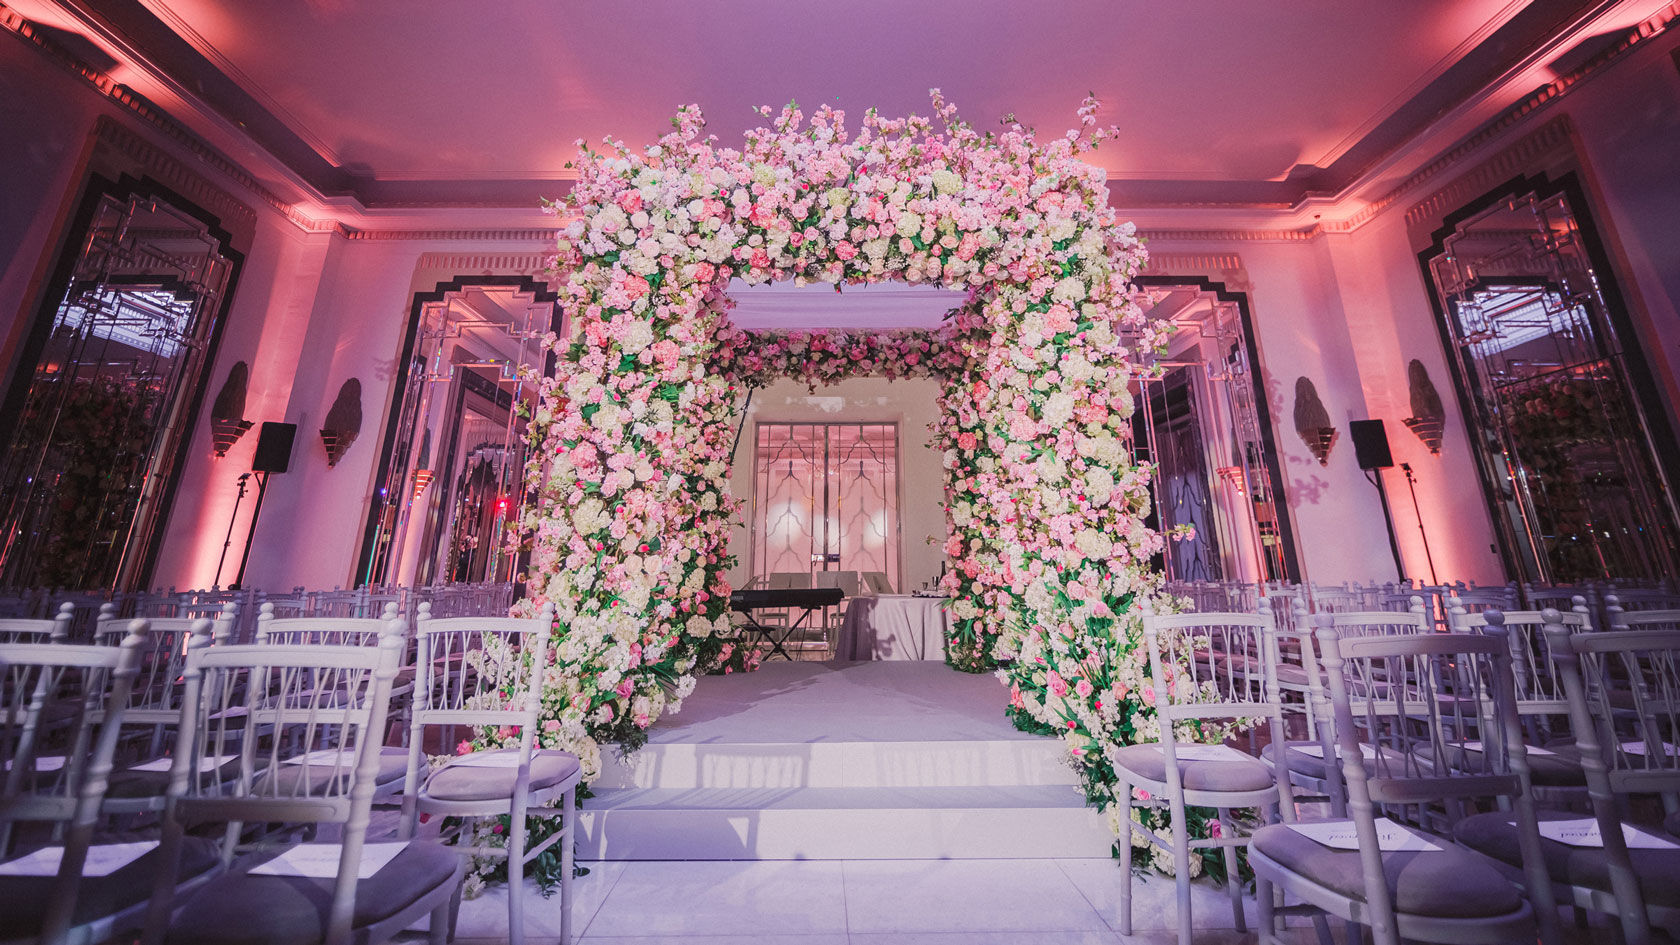 floral chuppah ceremony in grand ballroom for a wedding setting